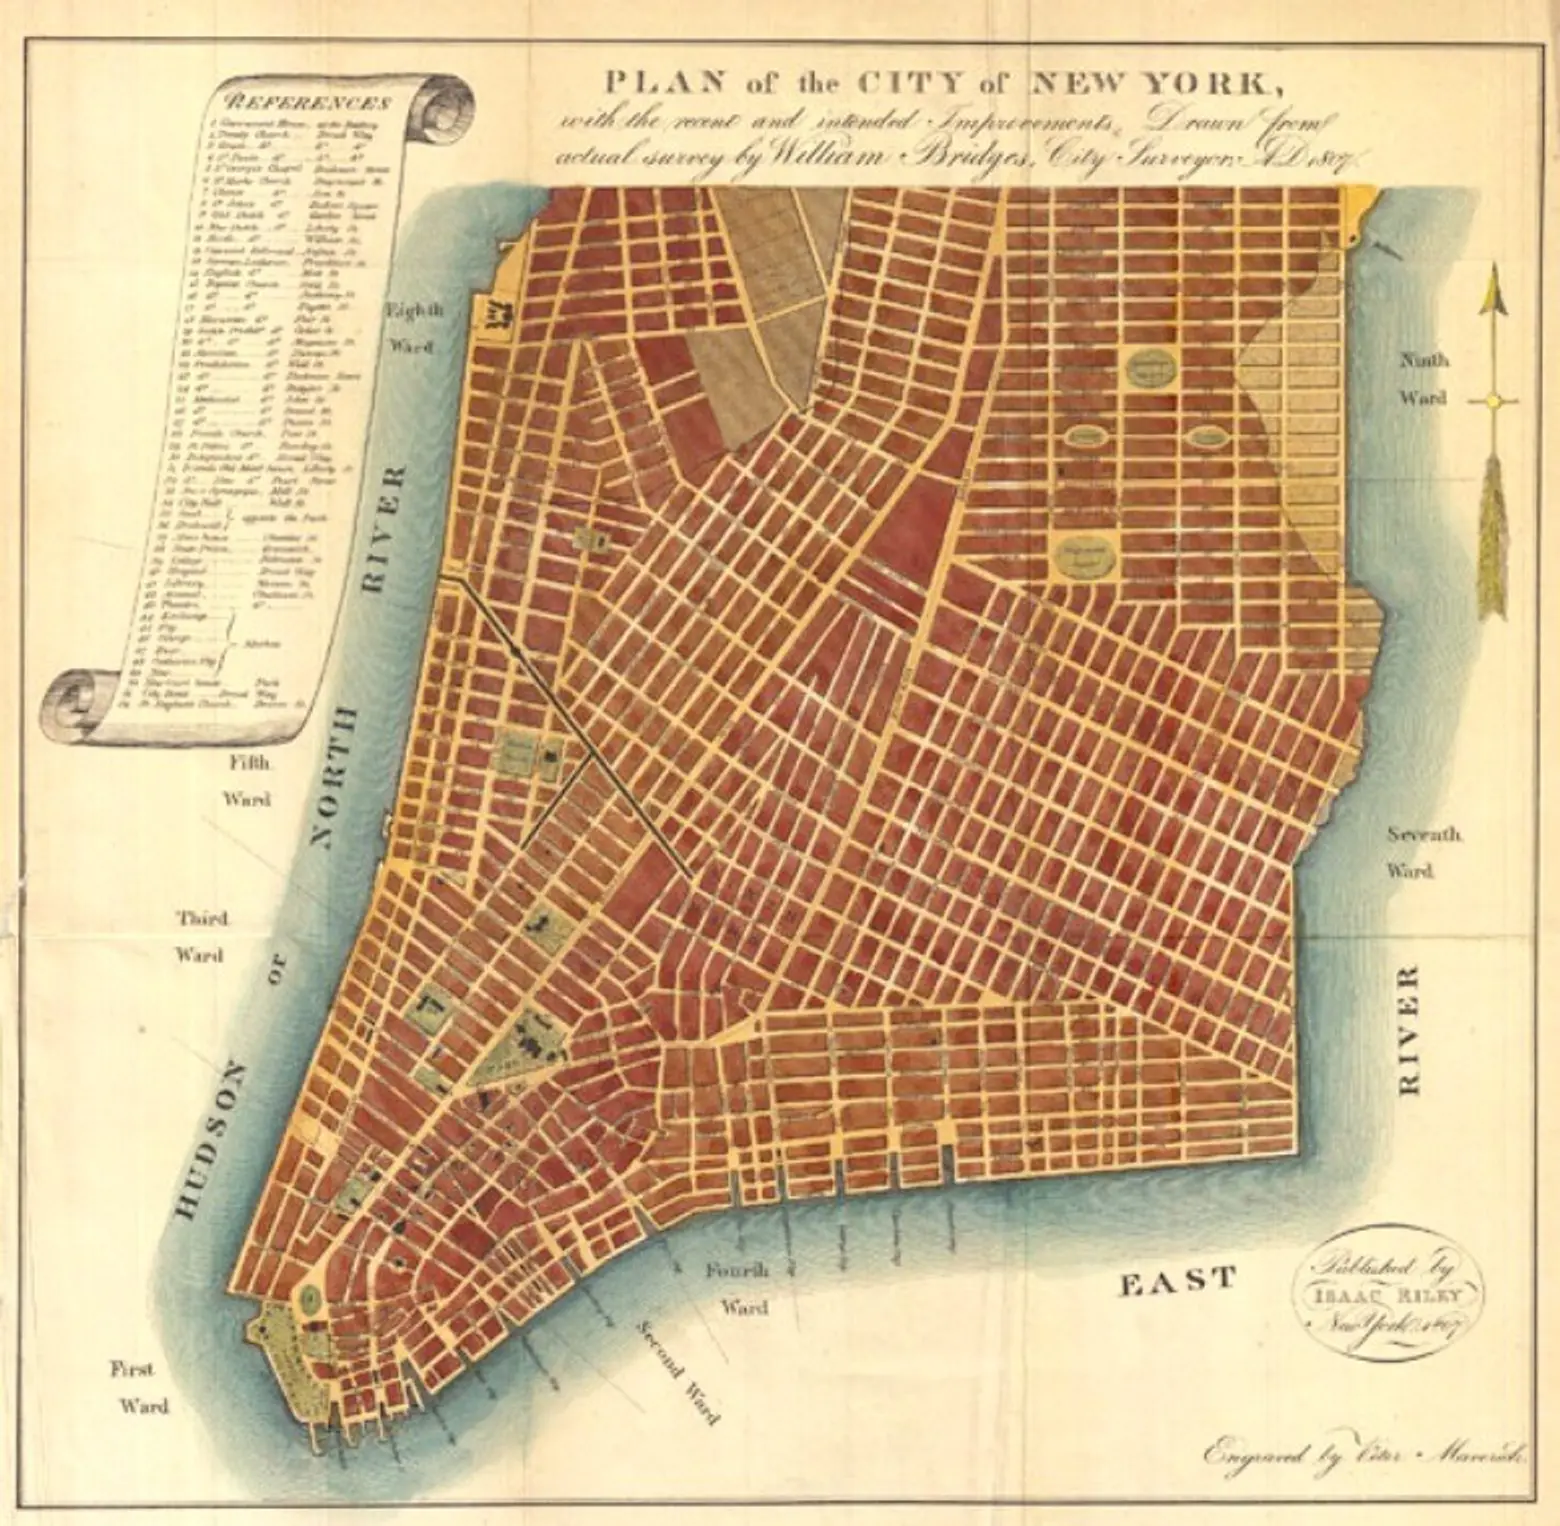 On this day in 1811, the Manhattan Street Grid became official